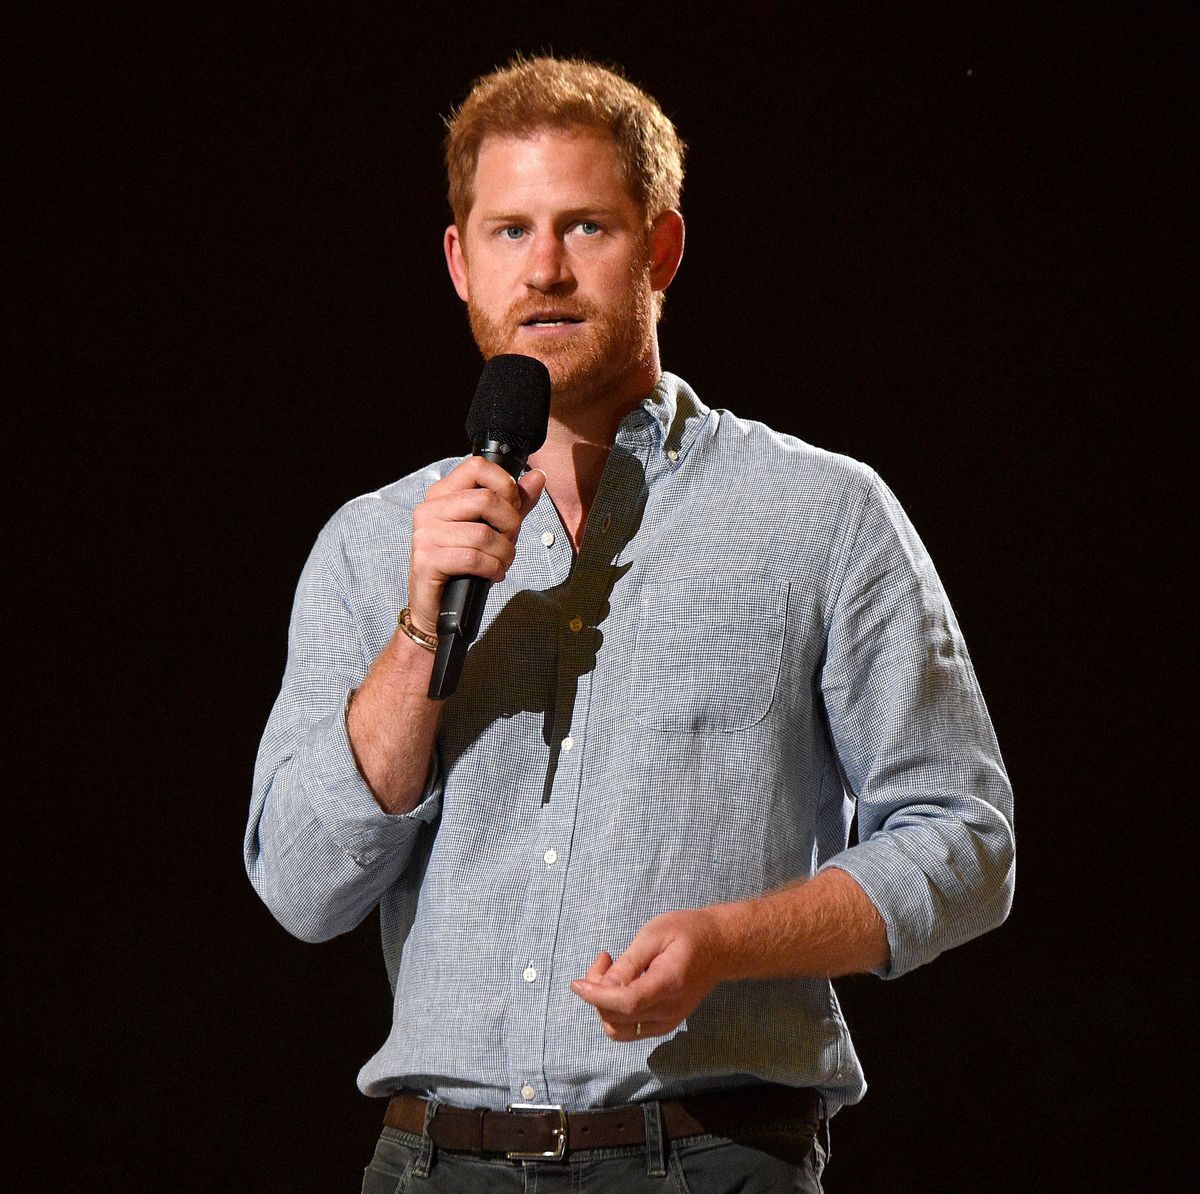 inglewood, california in this image released on may 2, prince harry, duke of sussex speaks onstage during global citizen vax live the concert to reunite the world at sofi stadium in inglewood, california global citizen vax live the concert to reunite the world will be broadcast on may 8, 2021 photo by kevin mazurgetty images for global citizen vax live